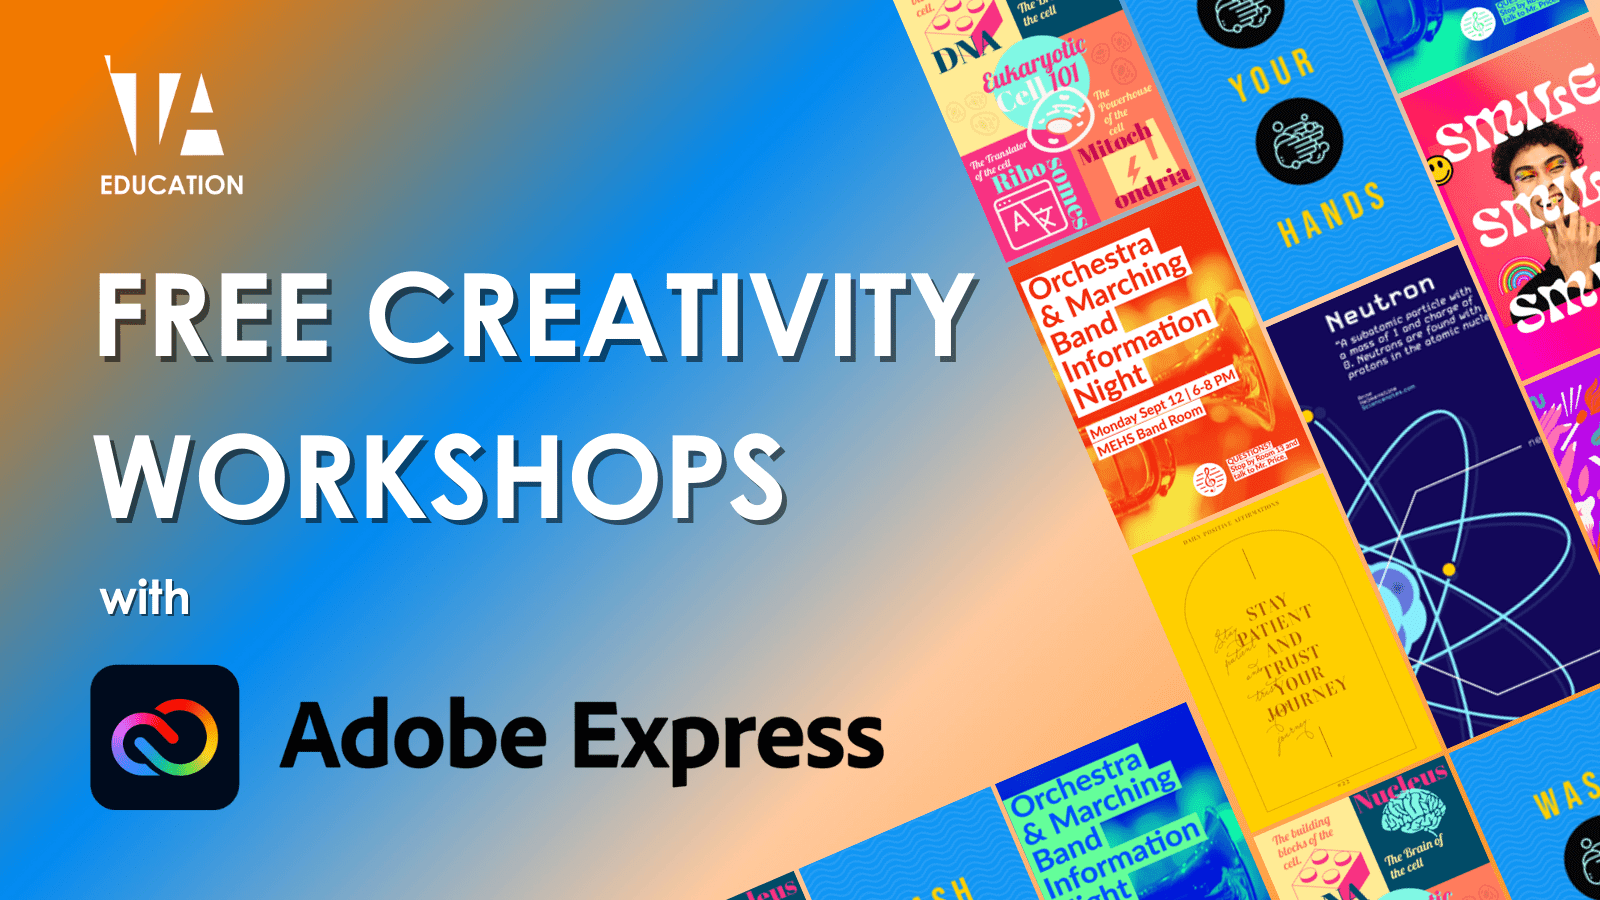 Featured image for “FREE CREATIVITY WORKSHOPS – ADOBE EXRPESS”